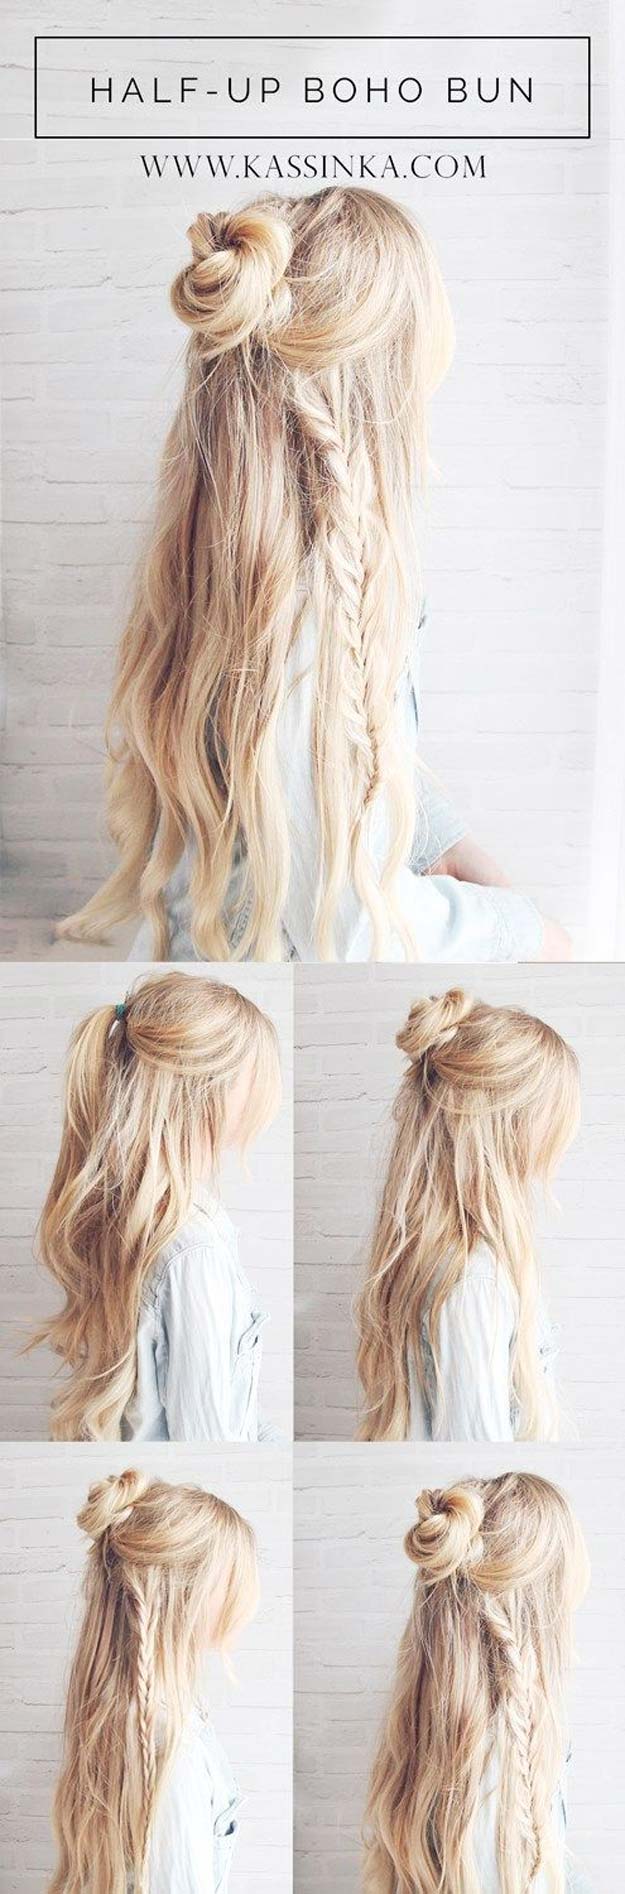 Best Hairstyles for Long Hair - Boho Braided Bun Hair - Step by Step Tutorials for Easy Curls, Updo, Half Up, Braids and Lazy Girl Looks. Prom Ideas, Special Occasion Hair and Braiding Instructions for Teens, Teenagers and Adults, Women and Girls 